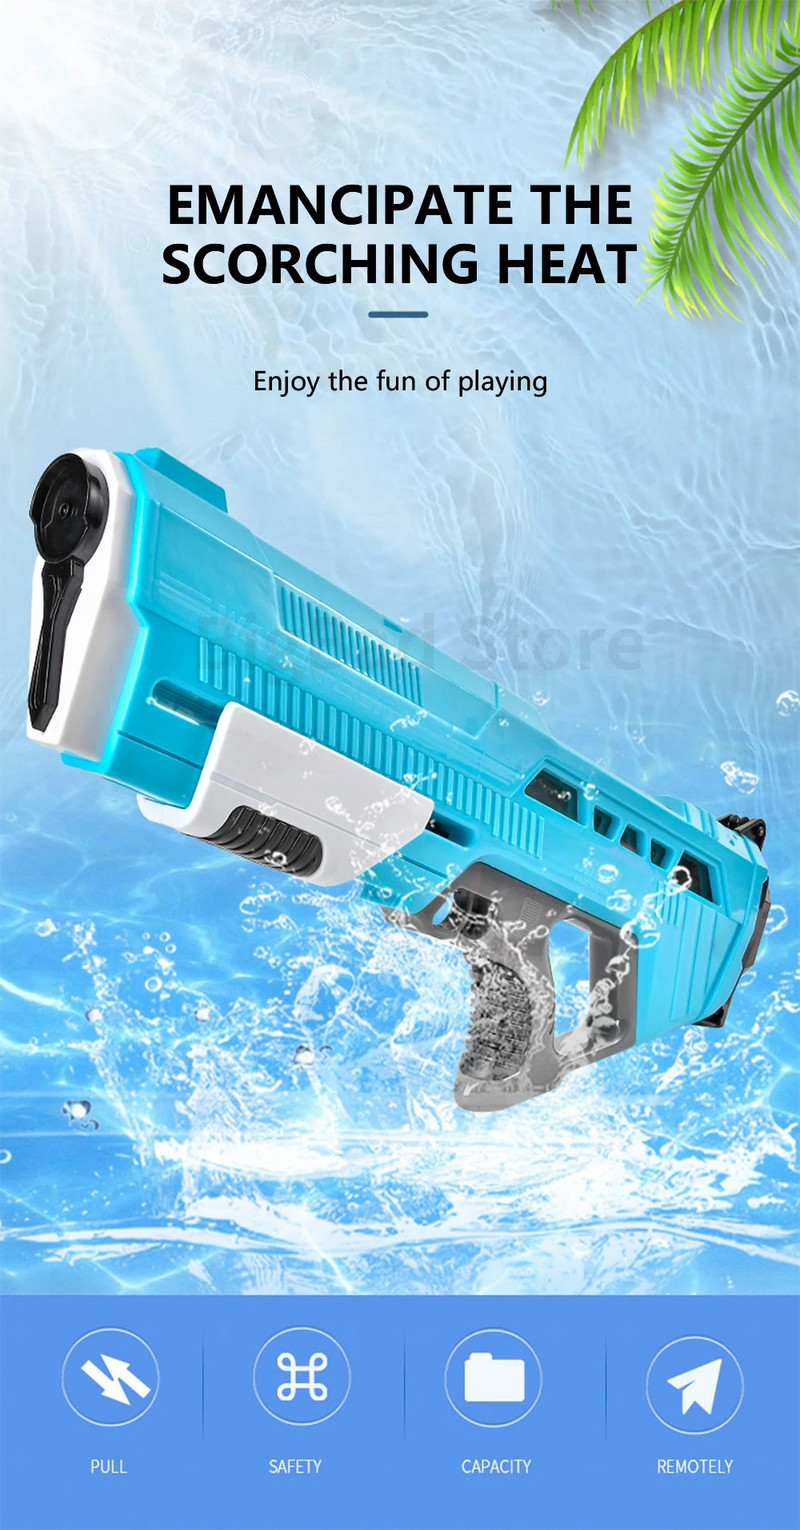 Water Guns Summer Soaker Squirt Guns 600CC for kids Boys Girls Adults Outdoor Toy for Swimming Pool Yard Lawn Beach